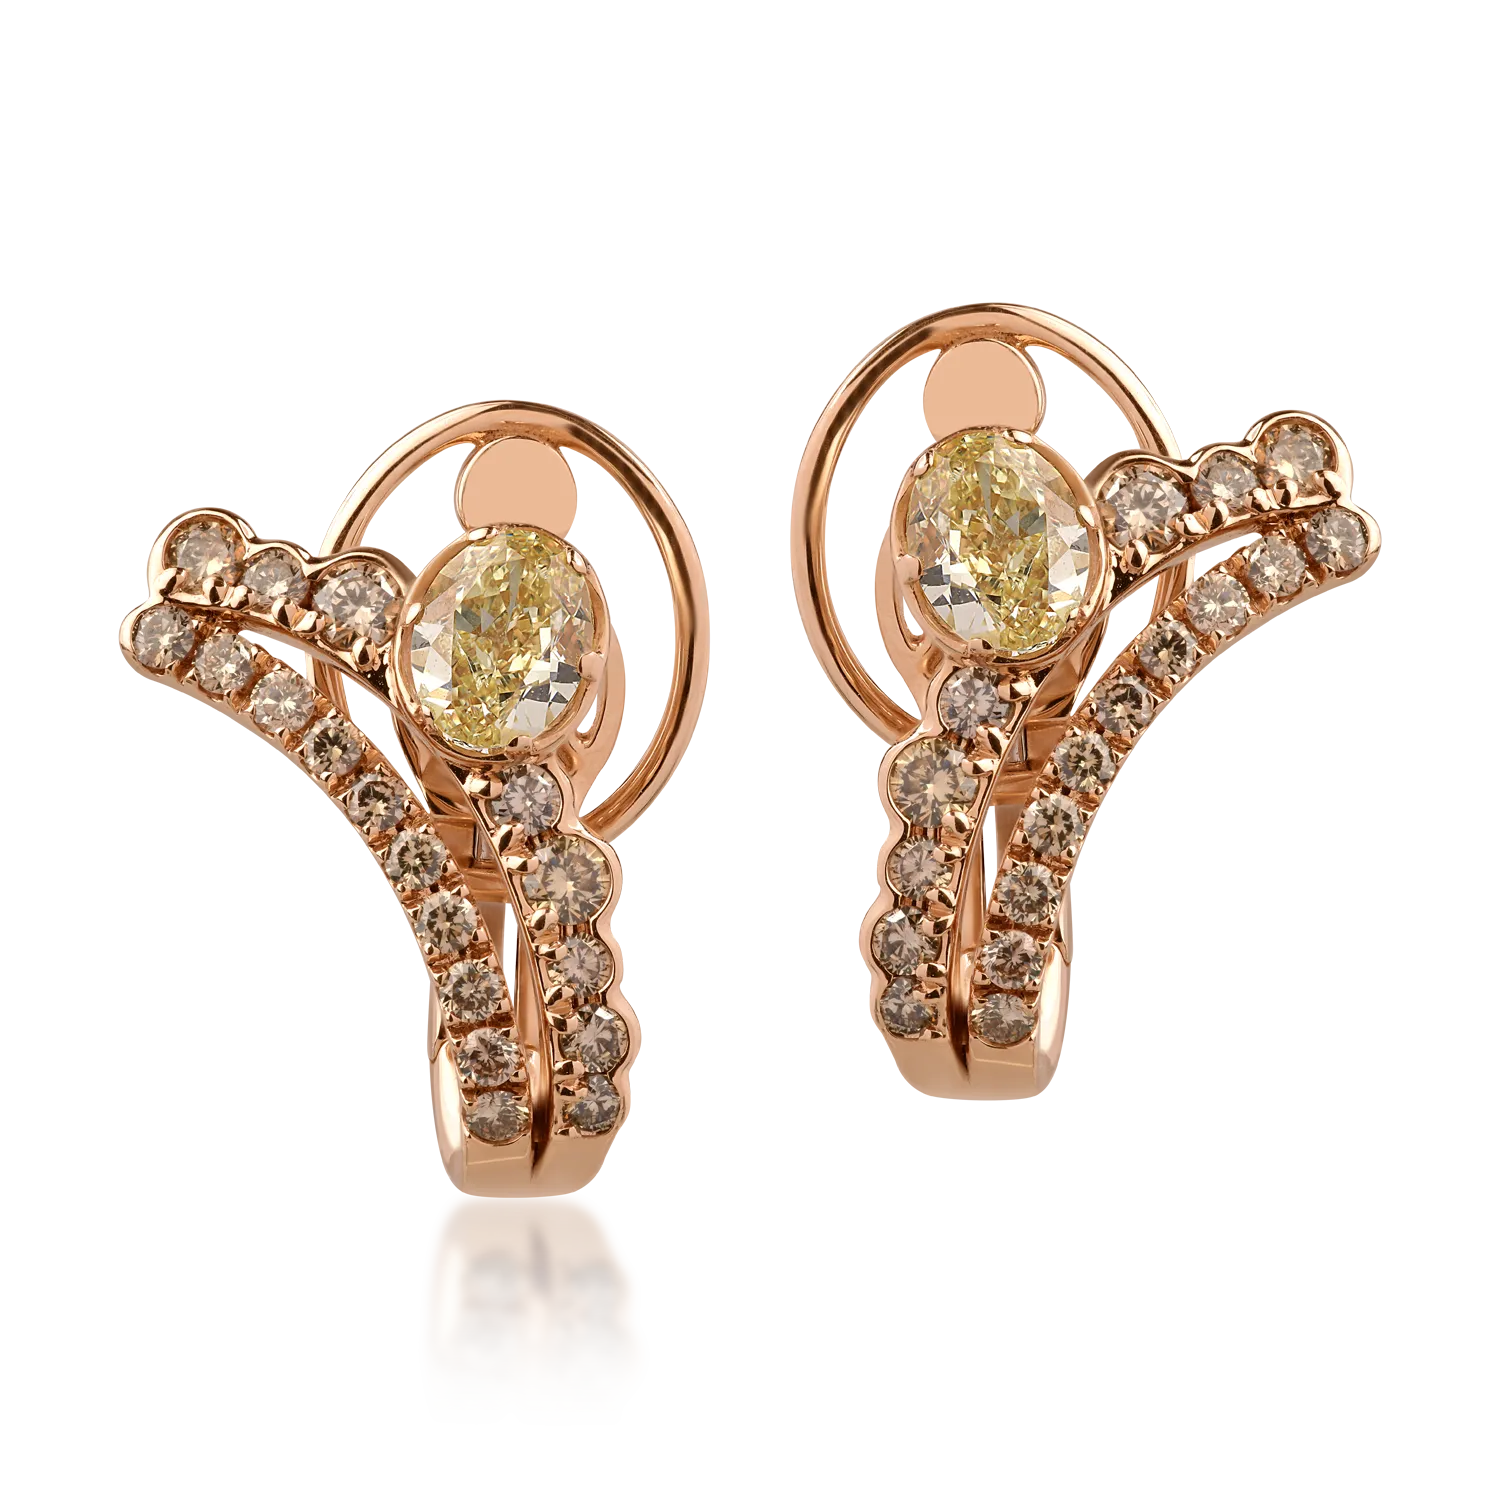 18K rose gold earrings with 1.63ct fancy-yellow diamonds and 1.1ct brown diamonds